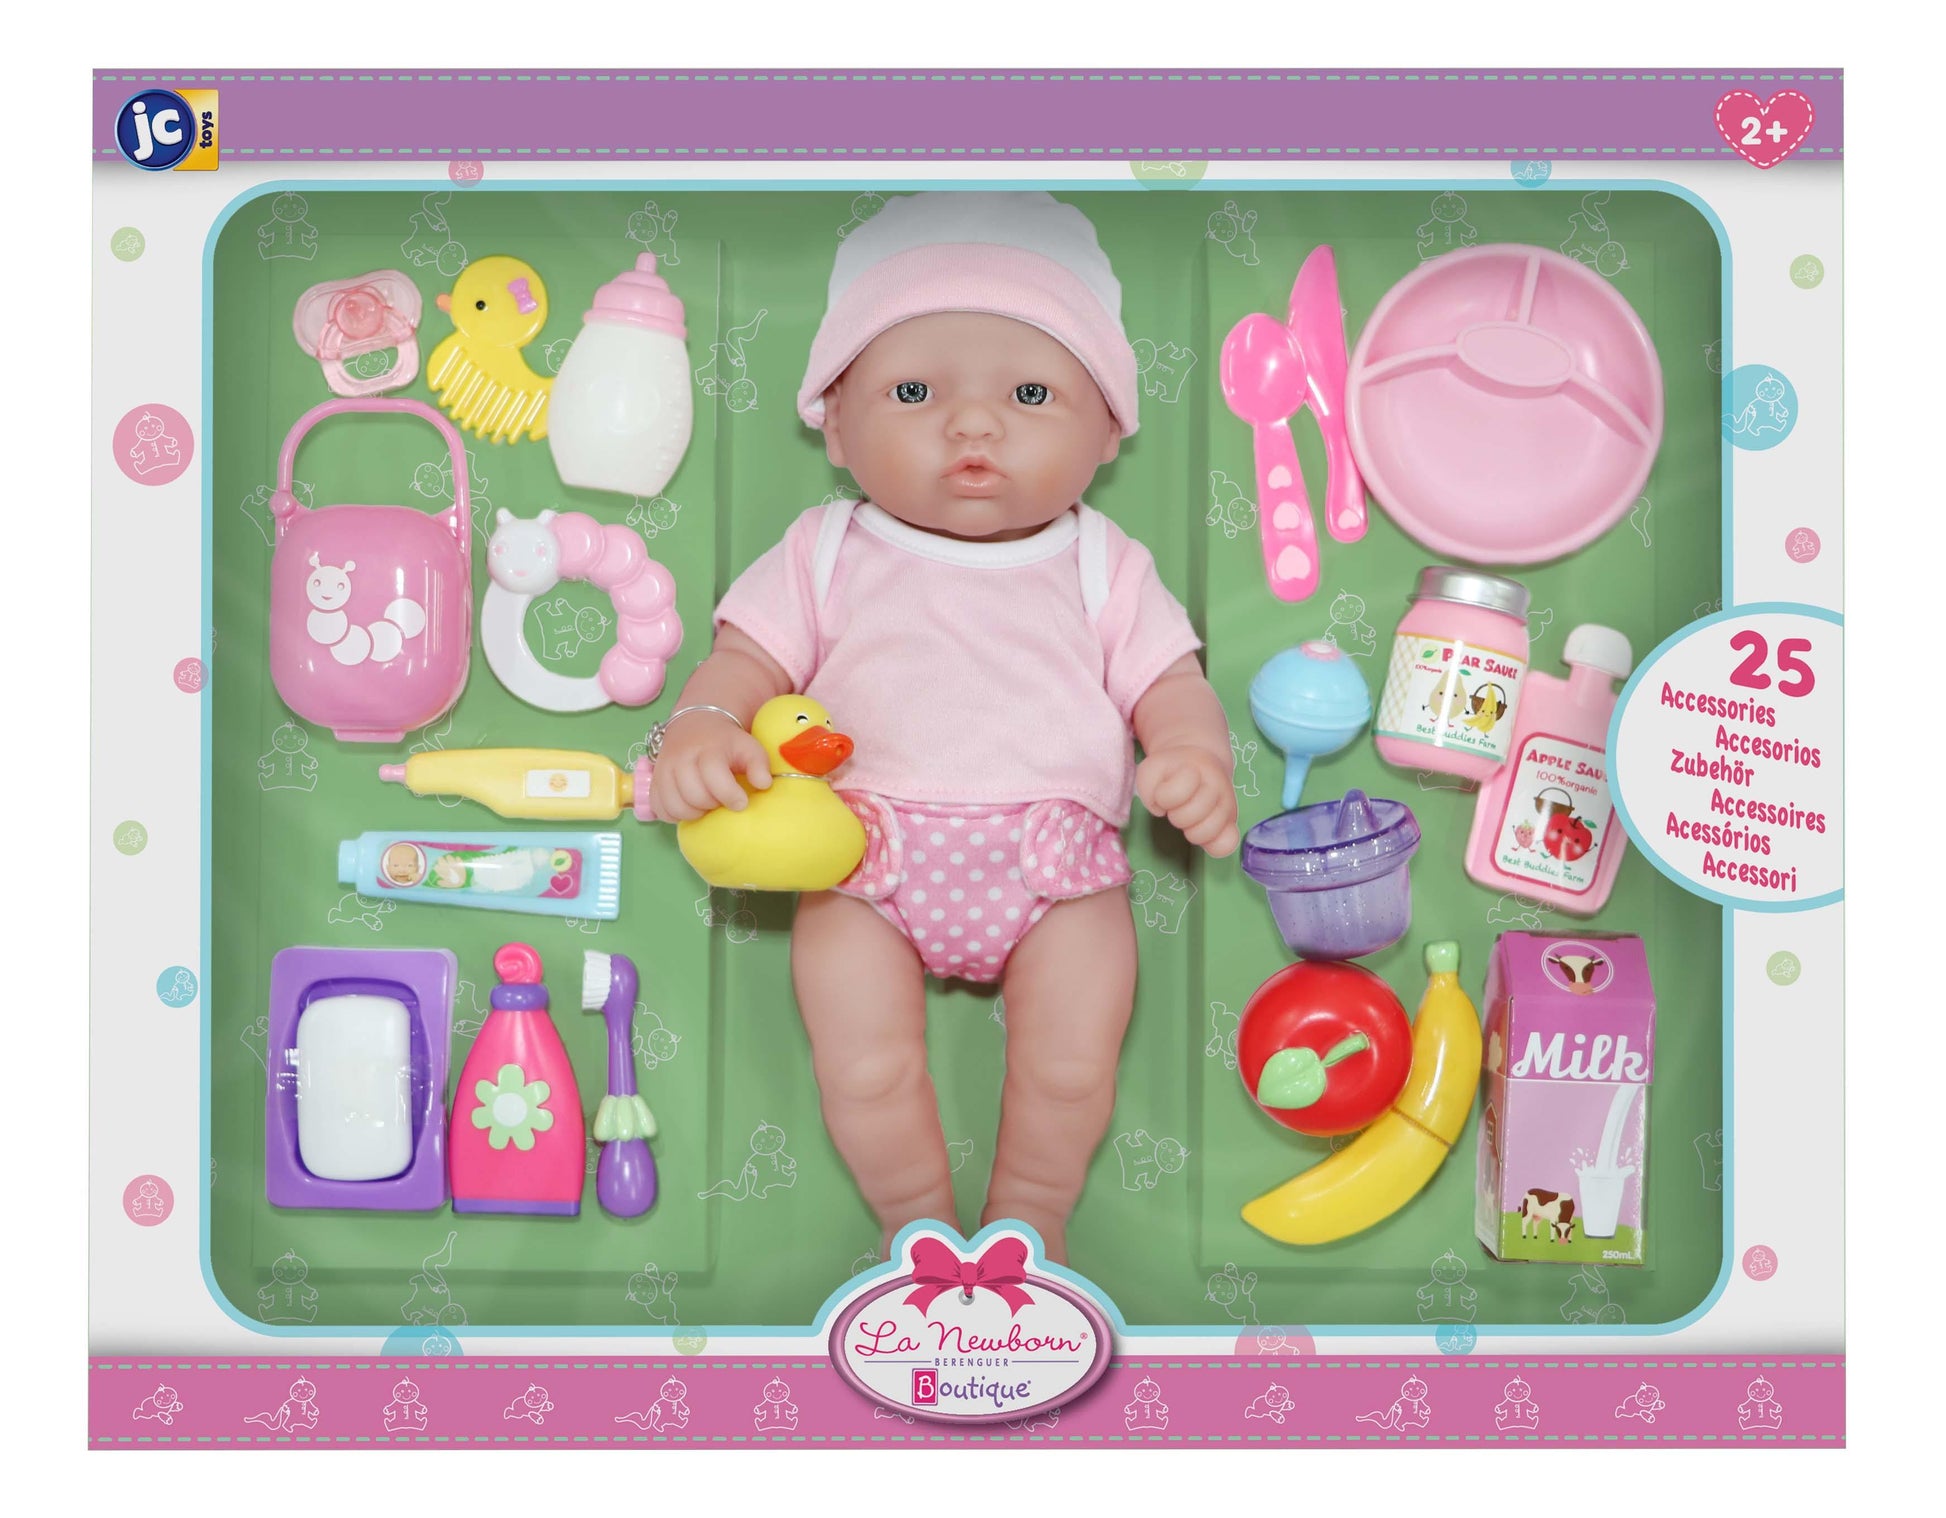 JC Toys, La Newborn Deluxe 12 inches Doll All Vinyl Nursery 25 Piece Gift Set - JC Toys Group Inc.